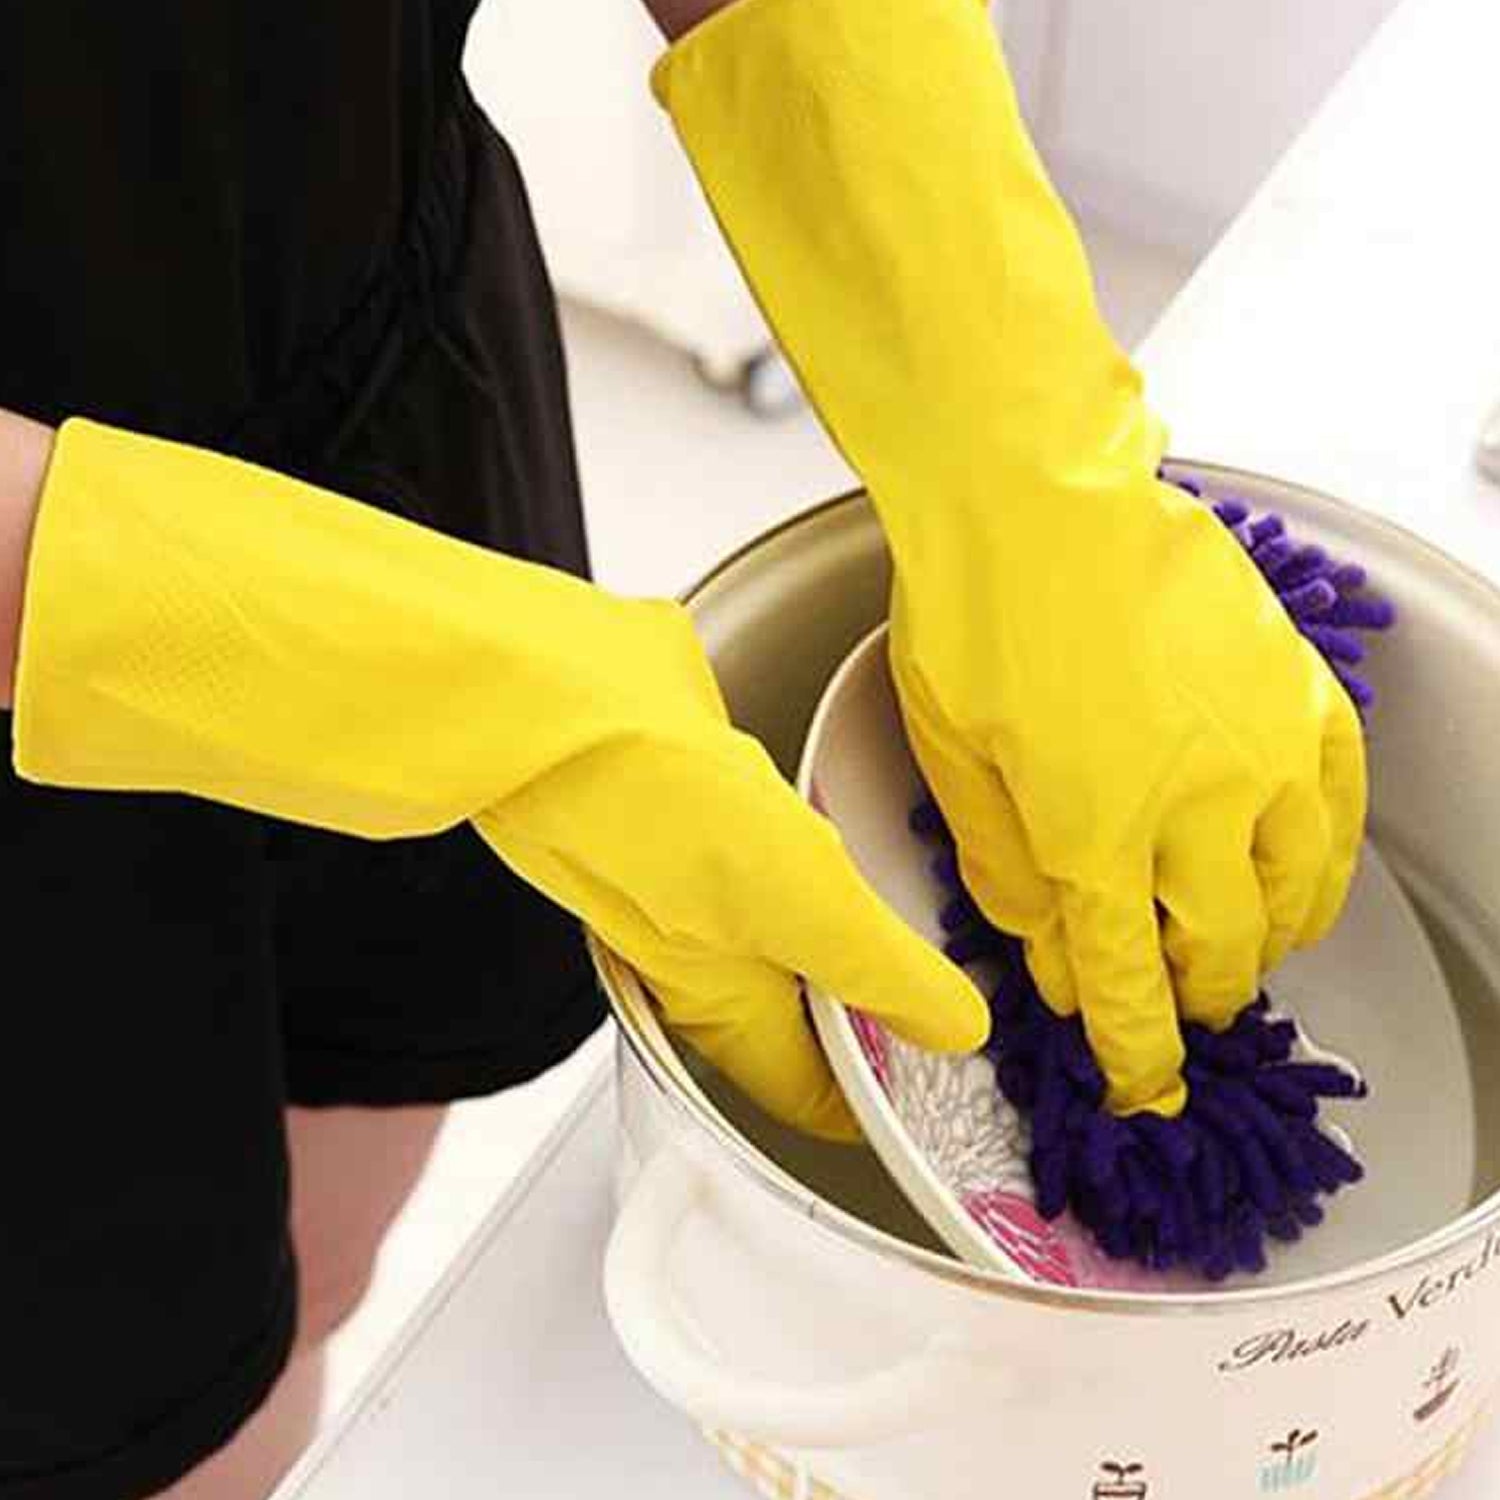 4853 Pair Of 2 Large Yellow Gloves For Types Of Purposes Like Washing Utensils, Gardening And Cleaning Toilet Etc. 